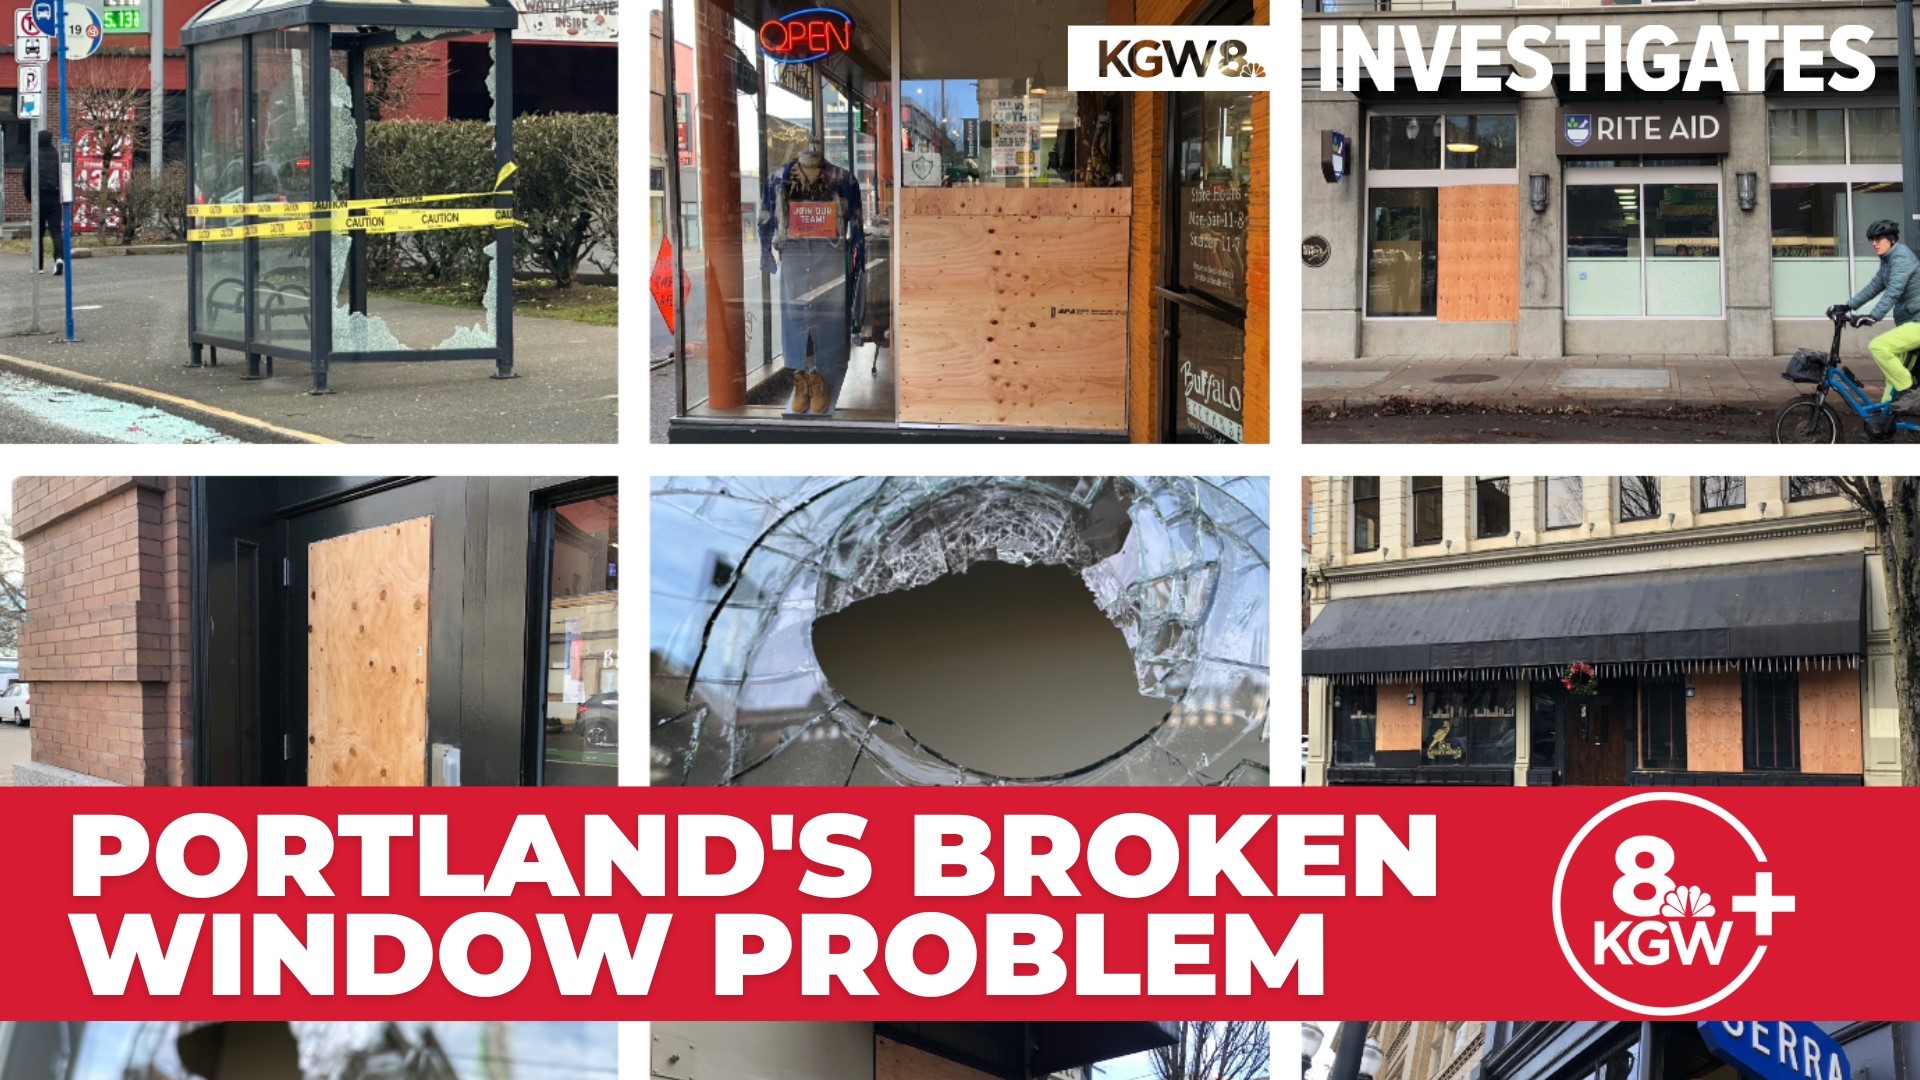 The KGW investigative team found there were more reports of broken windows and vandalism in Portland last year than during the violent protests of 2020.